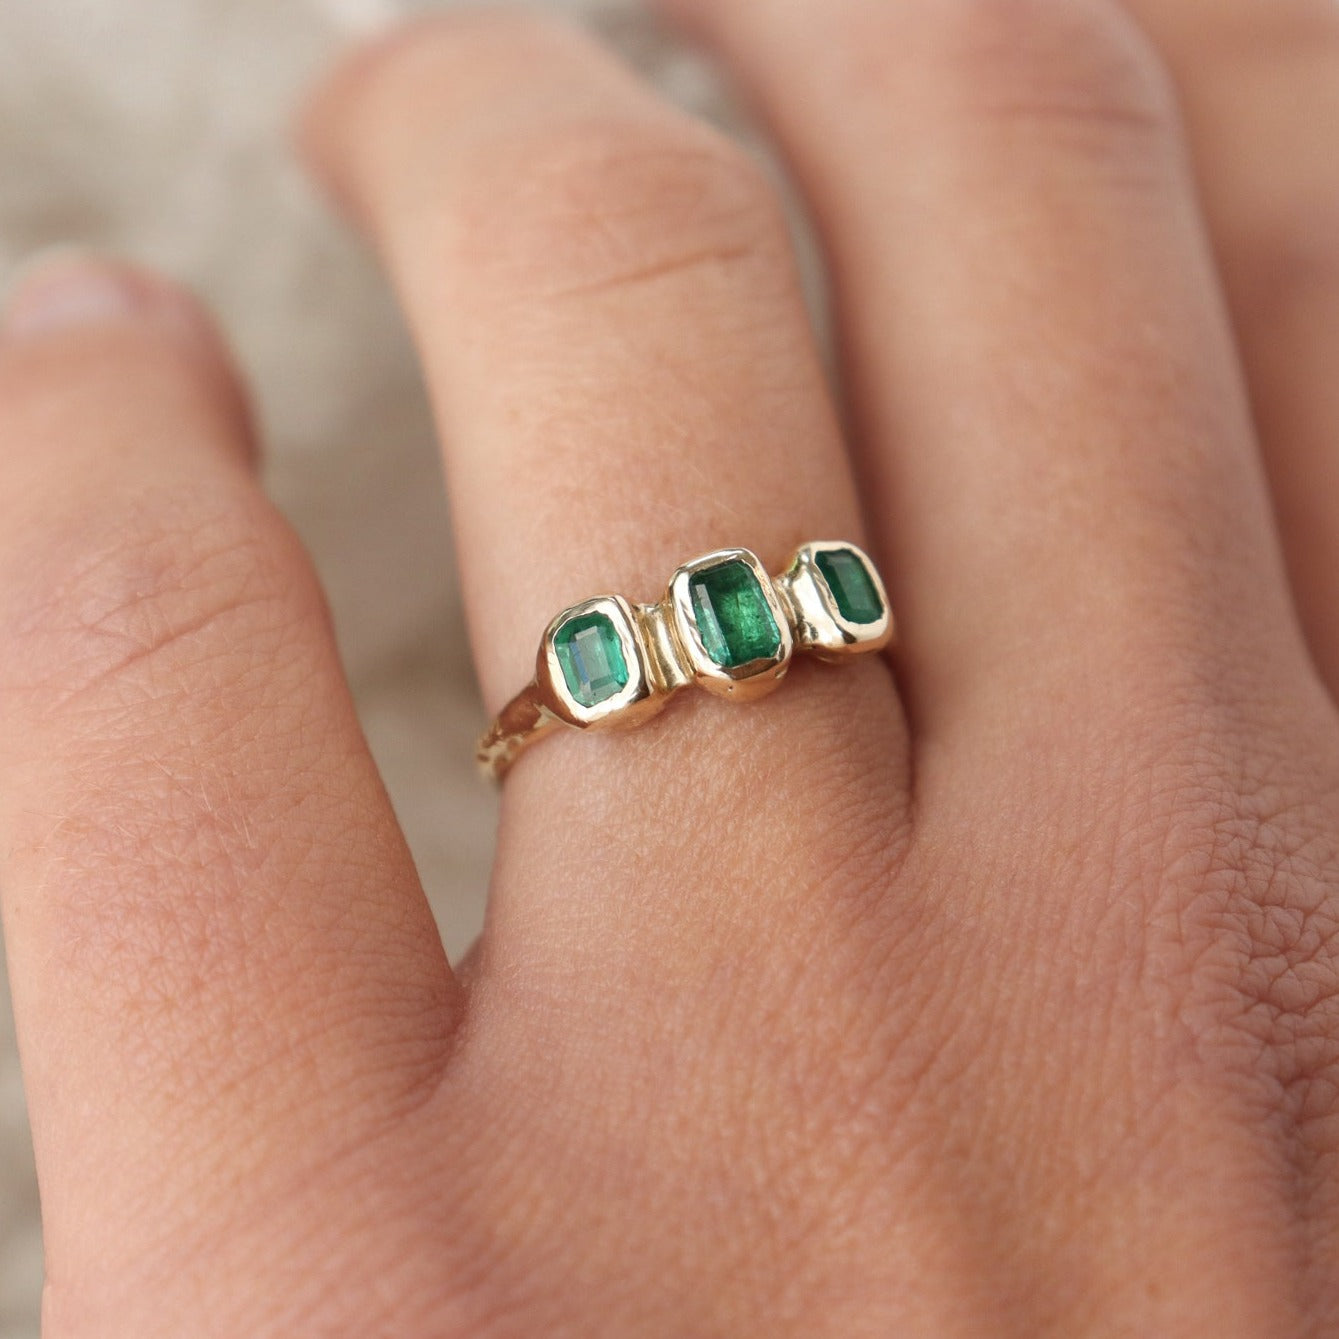 Worn on the ring finger, three small emerald cut emeralds are embedded into a 14k gold ring giving it an organic  and handcrafted look.